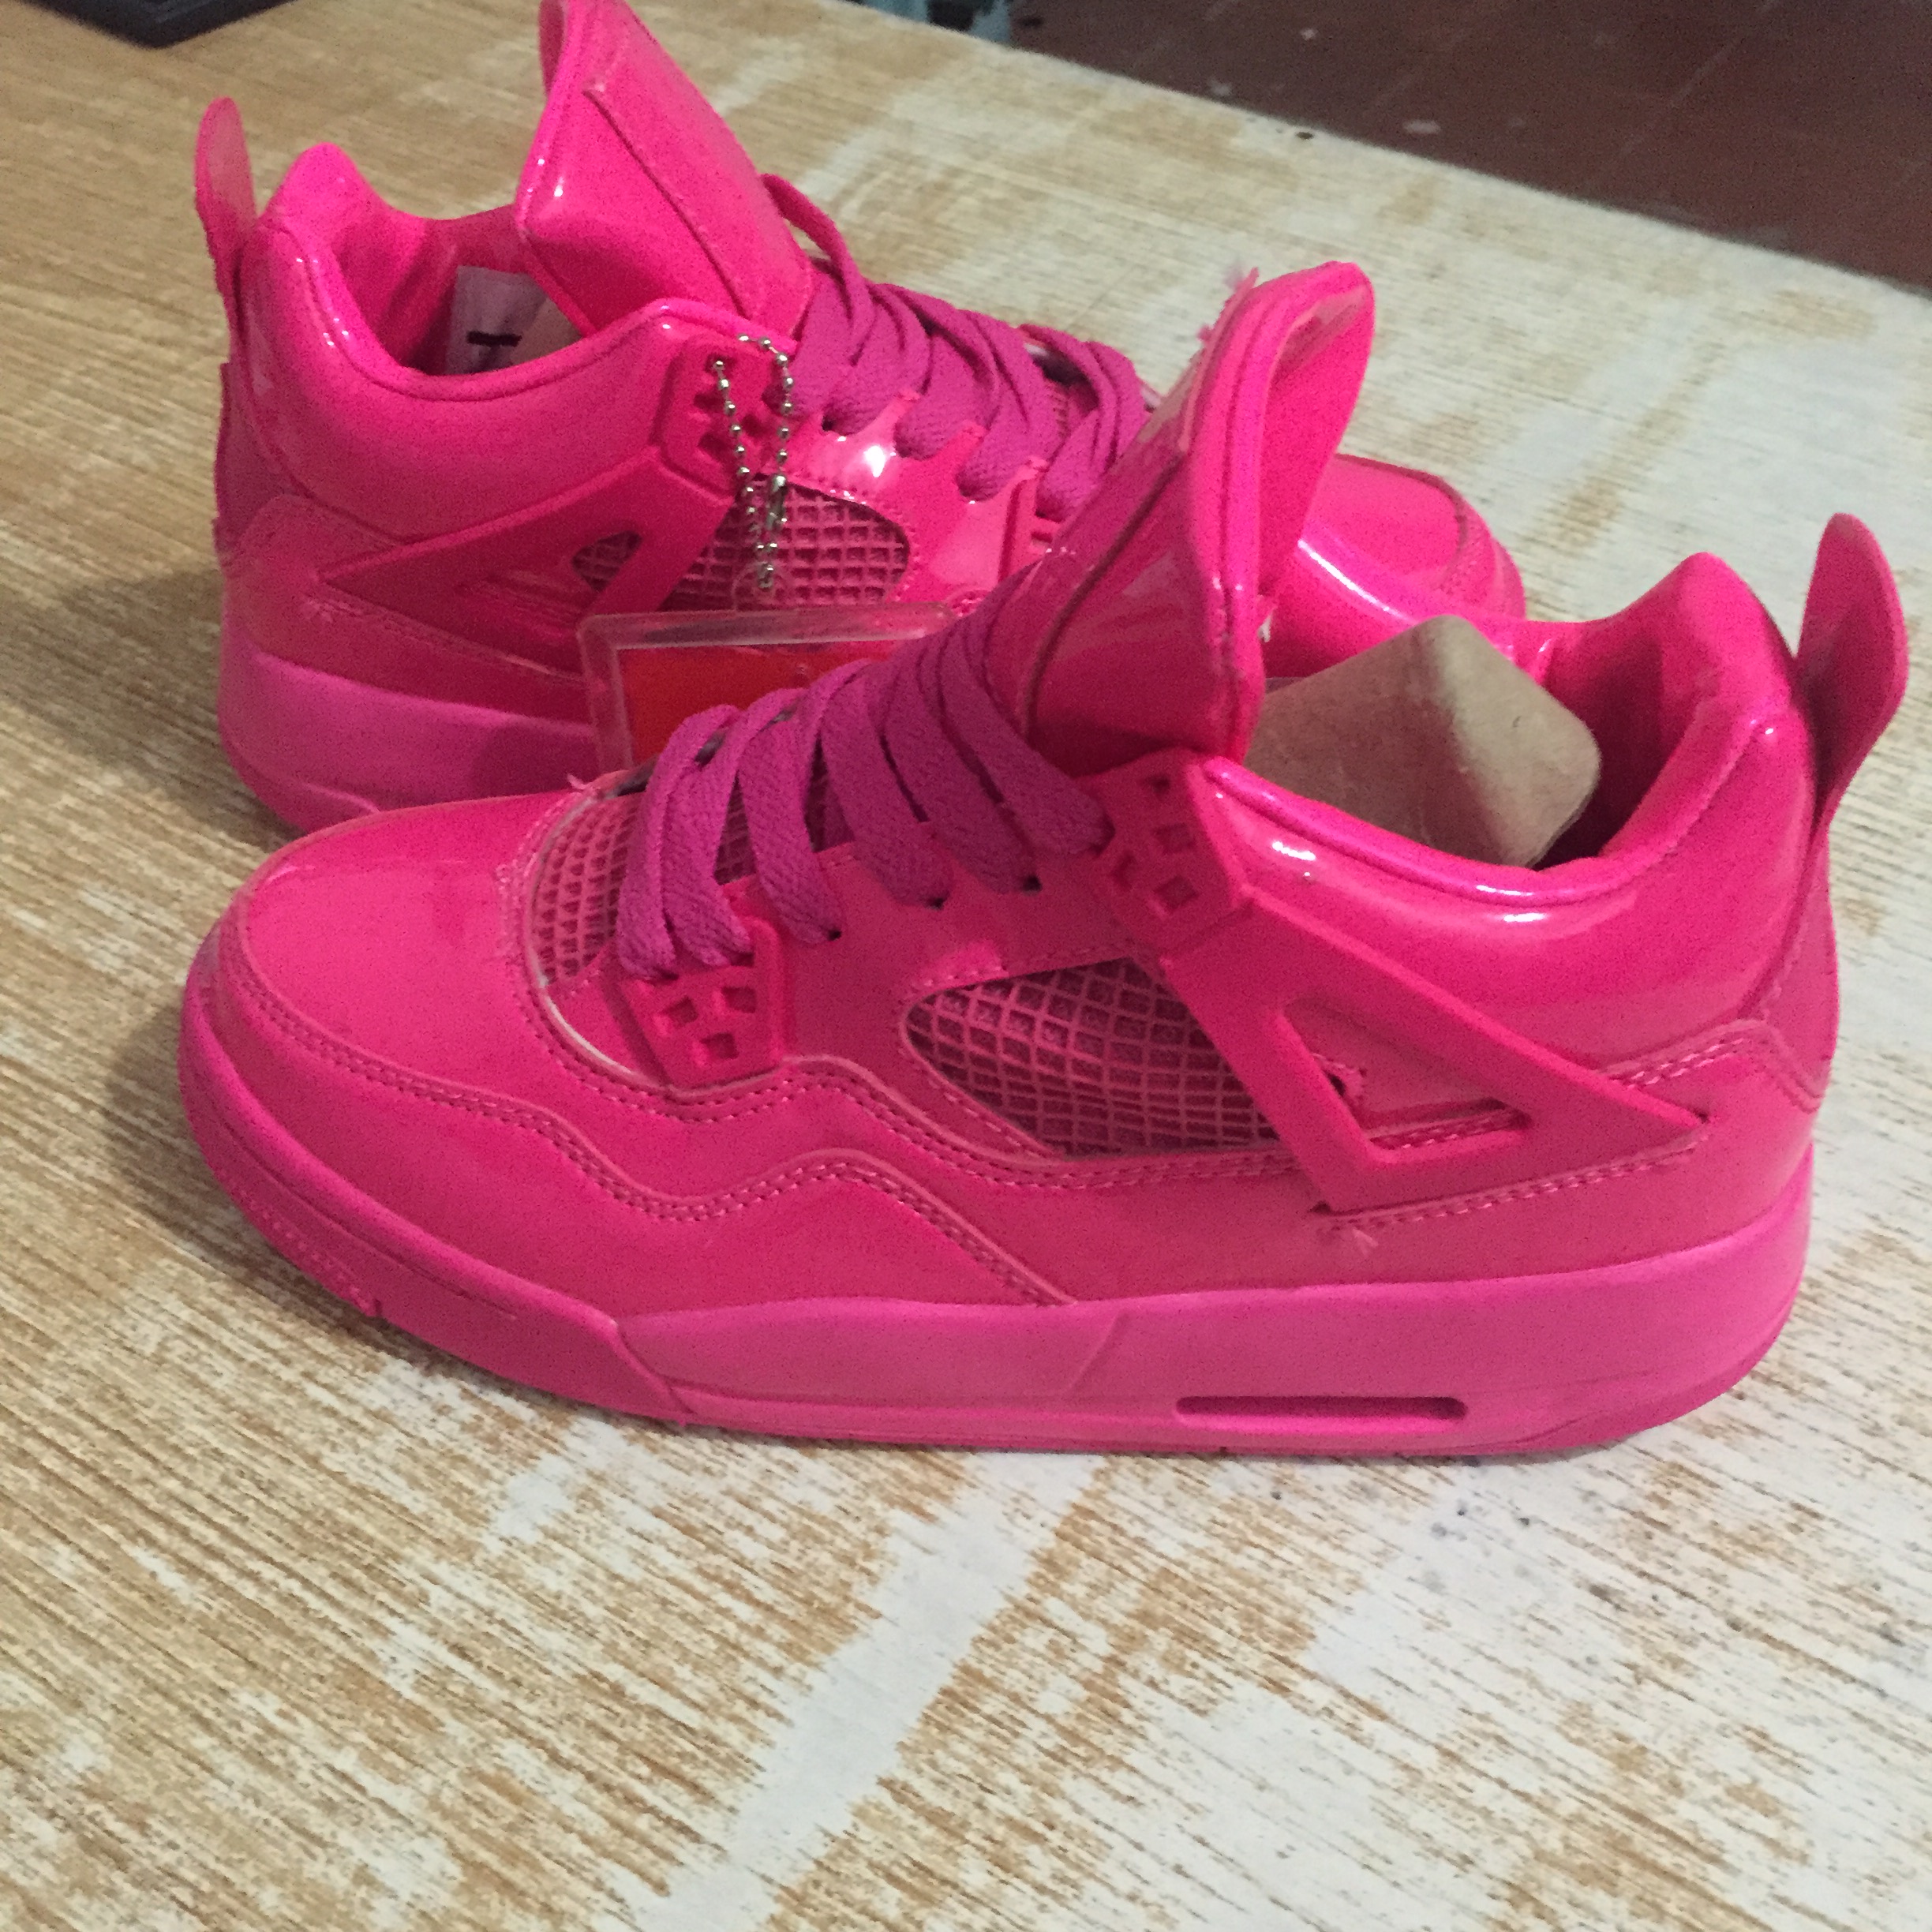 Air Jordan 4 All Red Valentine's Day Shoes